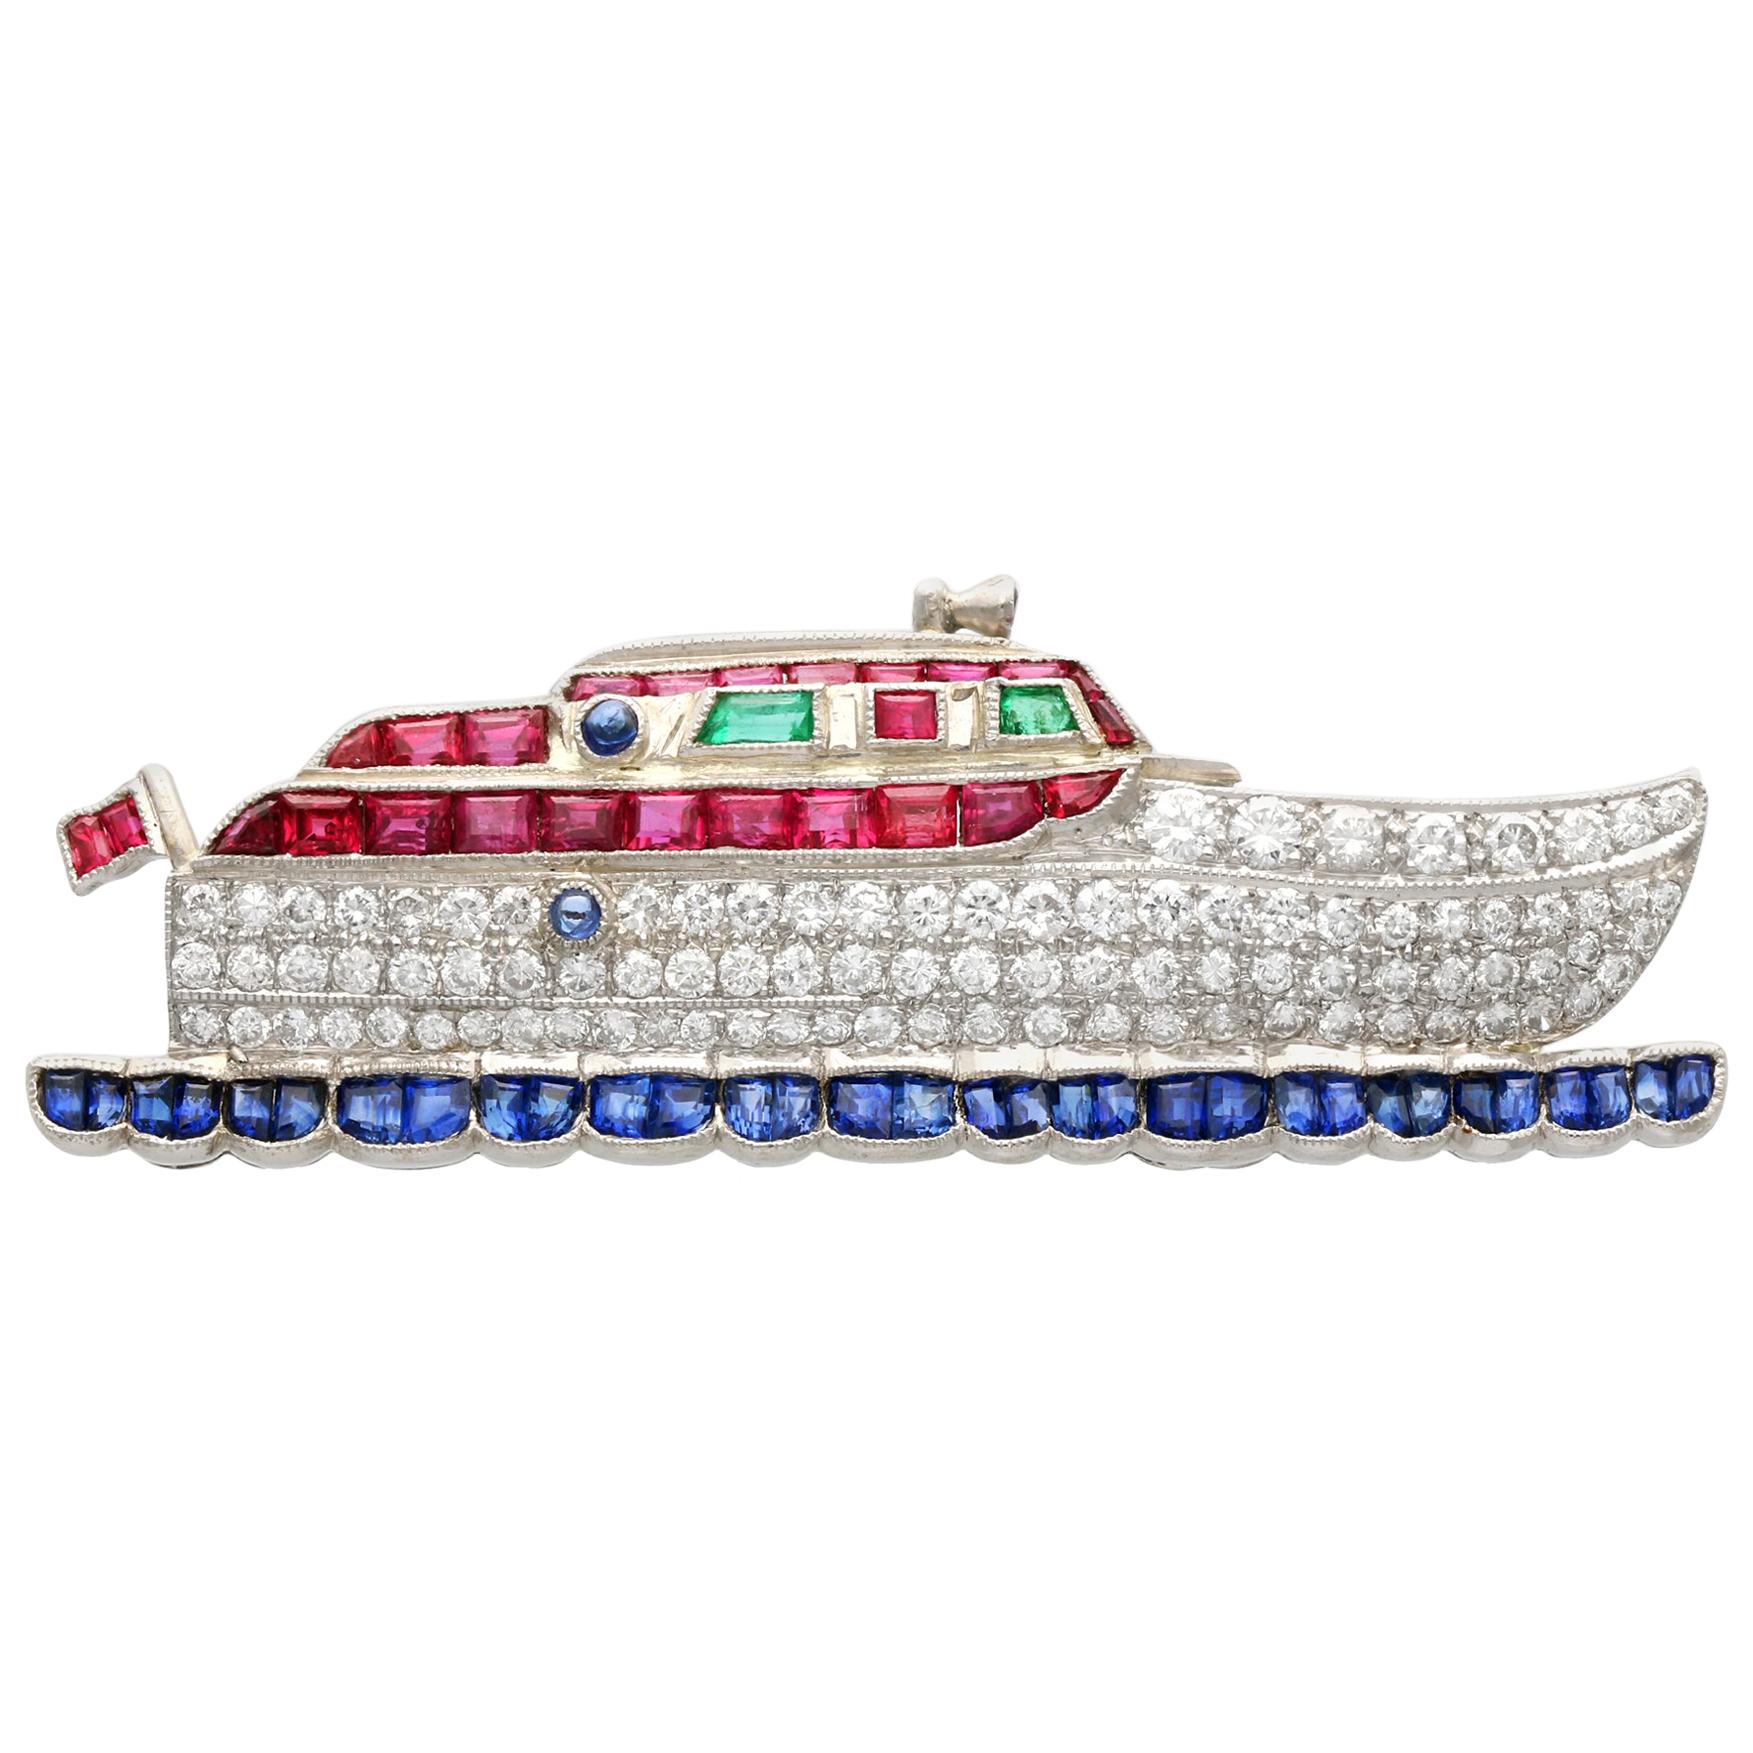 2.35 Carat Diamond Sapphire Ruby and Emerald Yellow Gold Boat Brooch